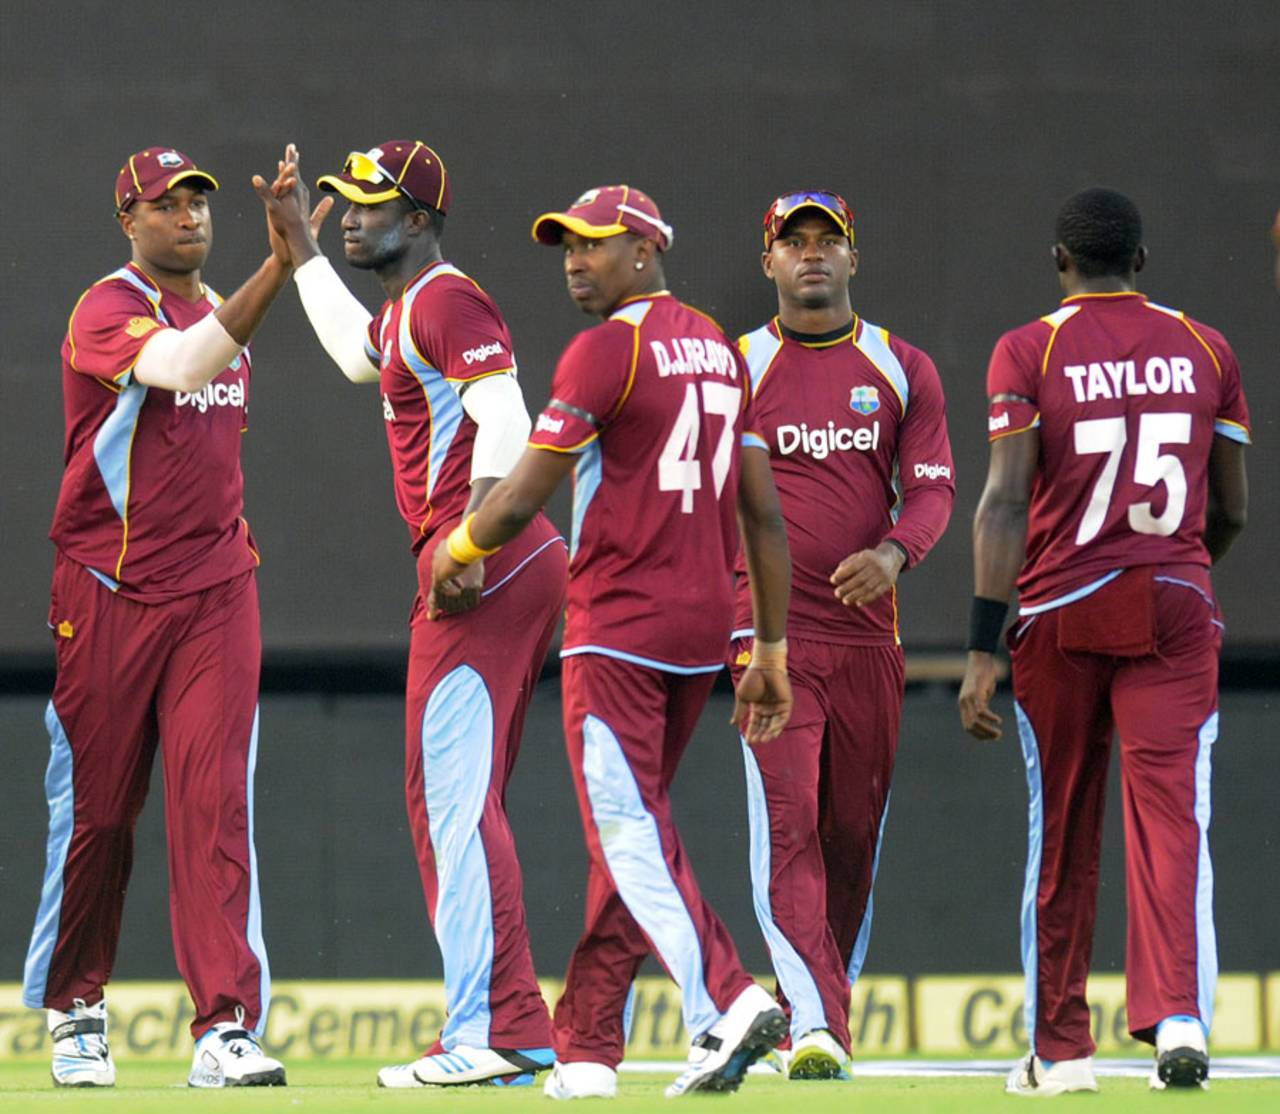 The West Indies bowlers stifled India at the death, India v West Indies, 2nd ODI, Delhi, October 11, 2014